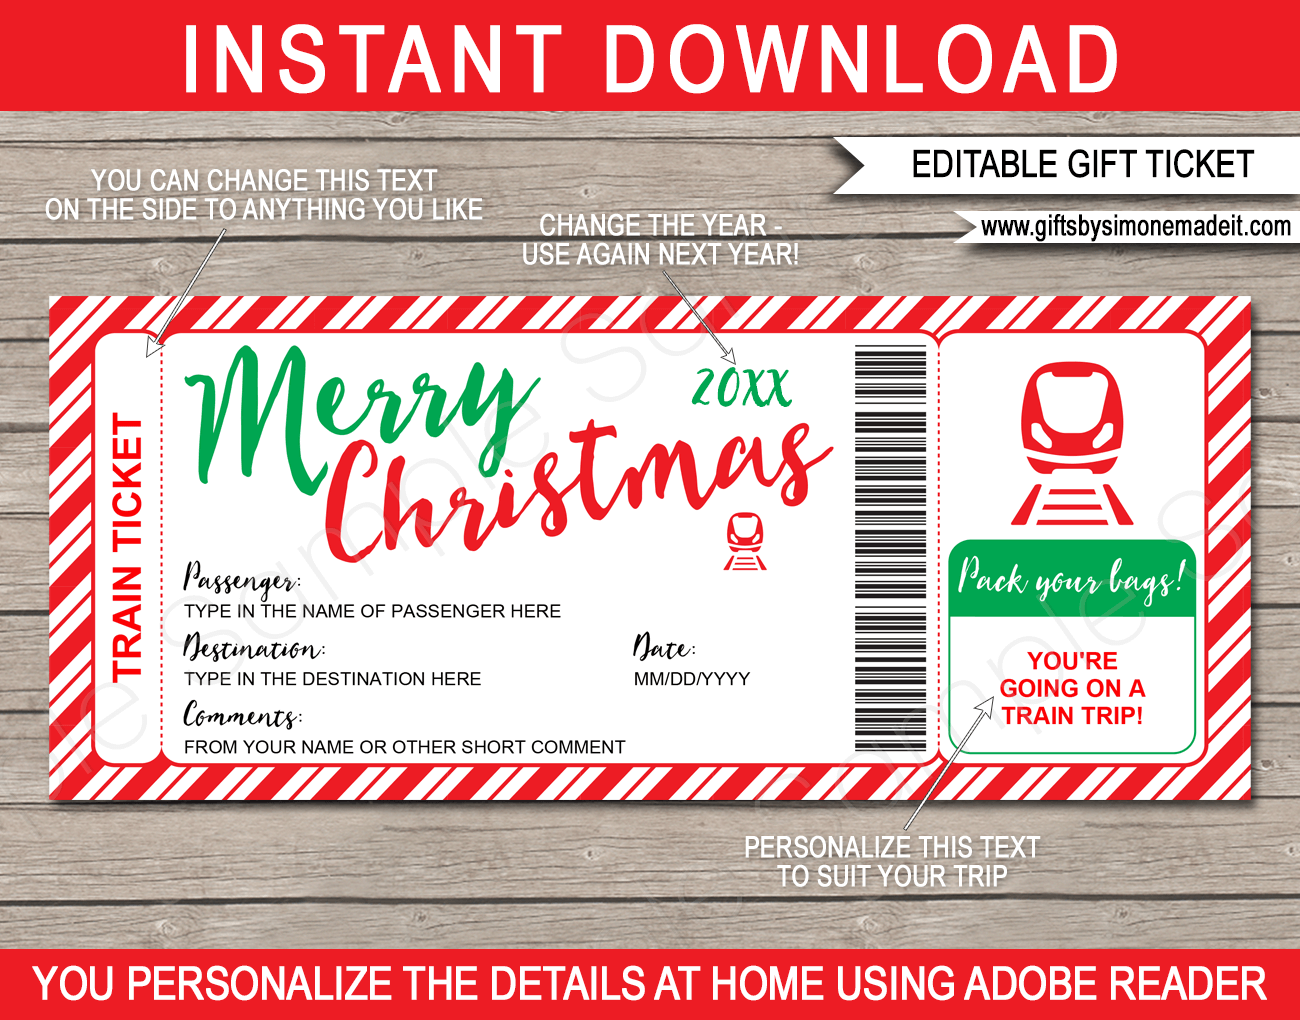 Printable Christmas Train Trip Reveal Gift Ticket | DIY Editable Train Boarding Pass Template | Holiday, Getaway, Vacation by Train | INSTANT DOWNLOAD via giftsbysimonemadeit.com